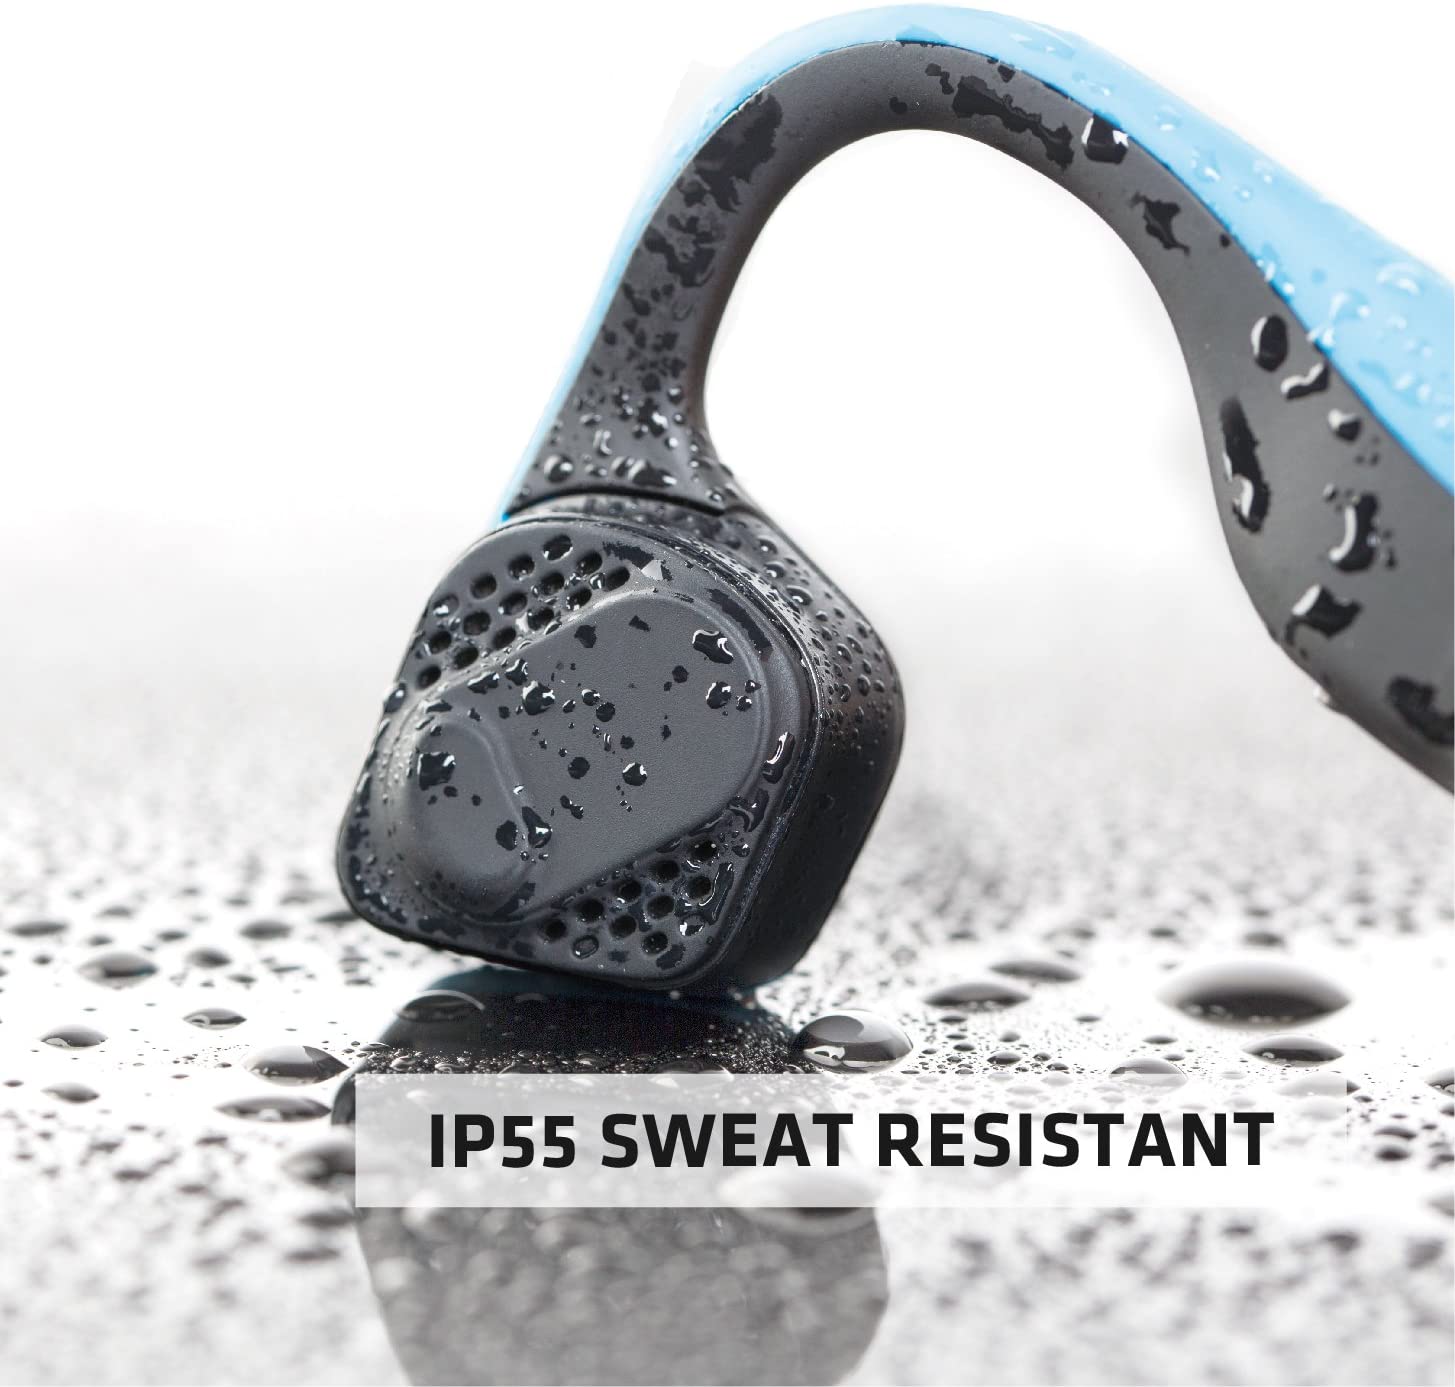 a part of the trekz titanium headphone showing it is sweat resistant with an IP55 rating